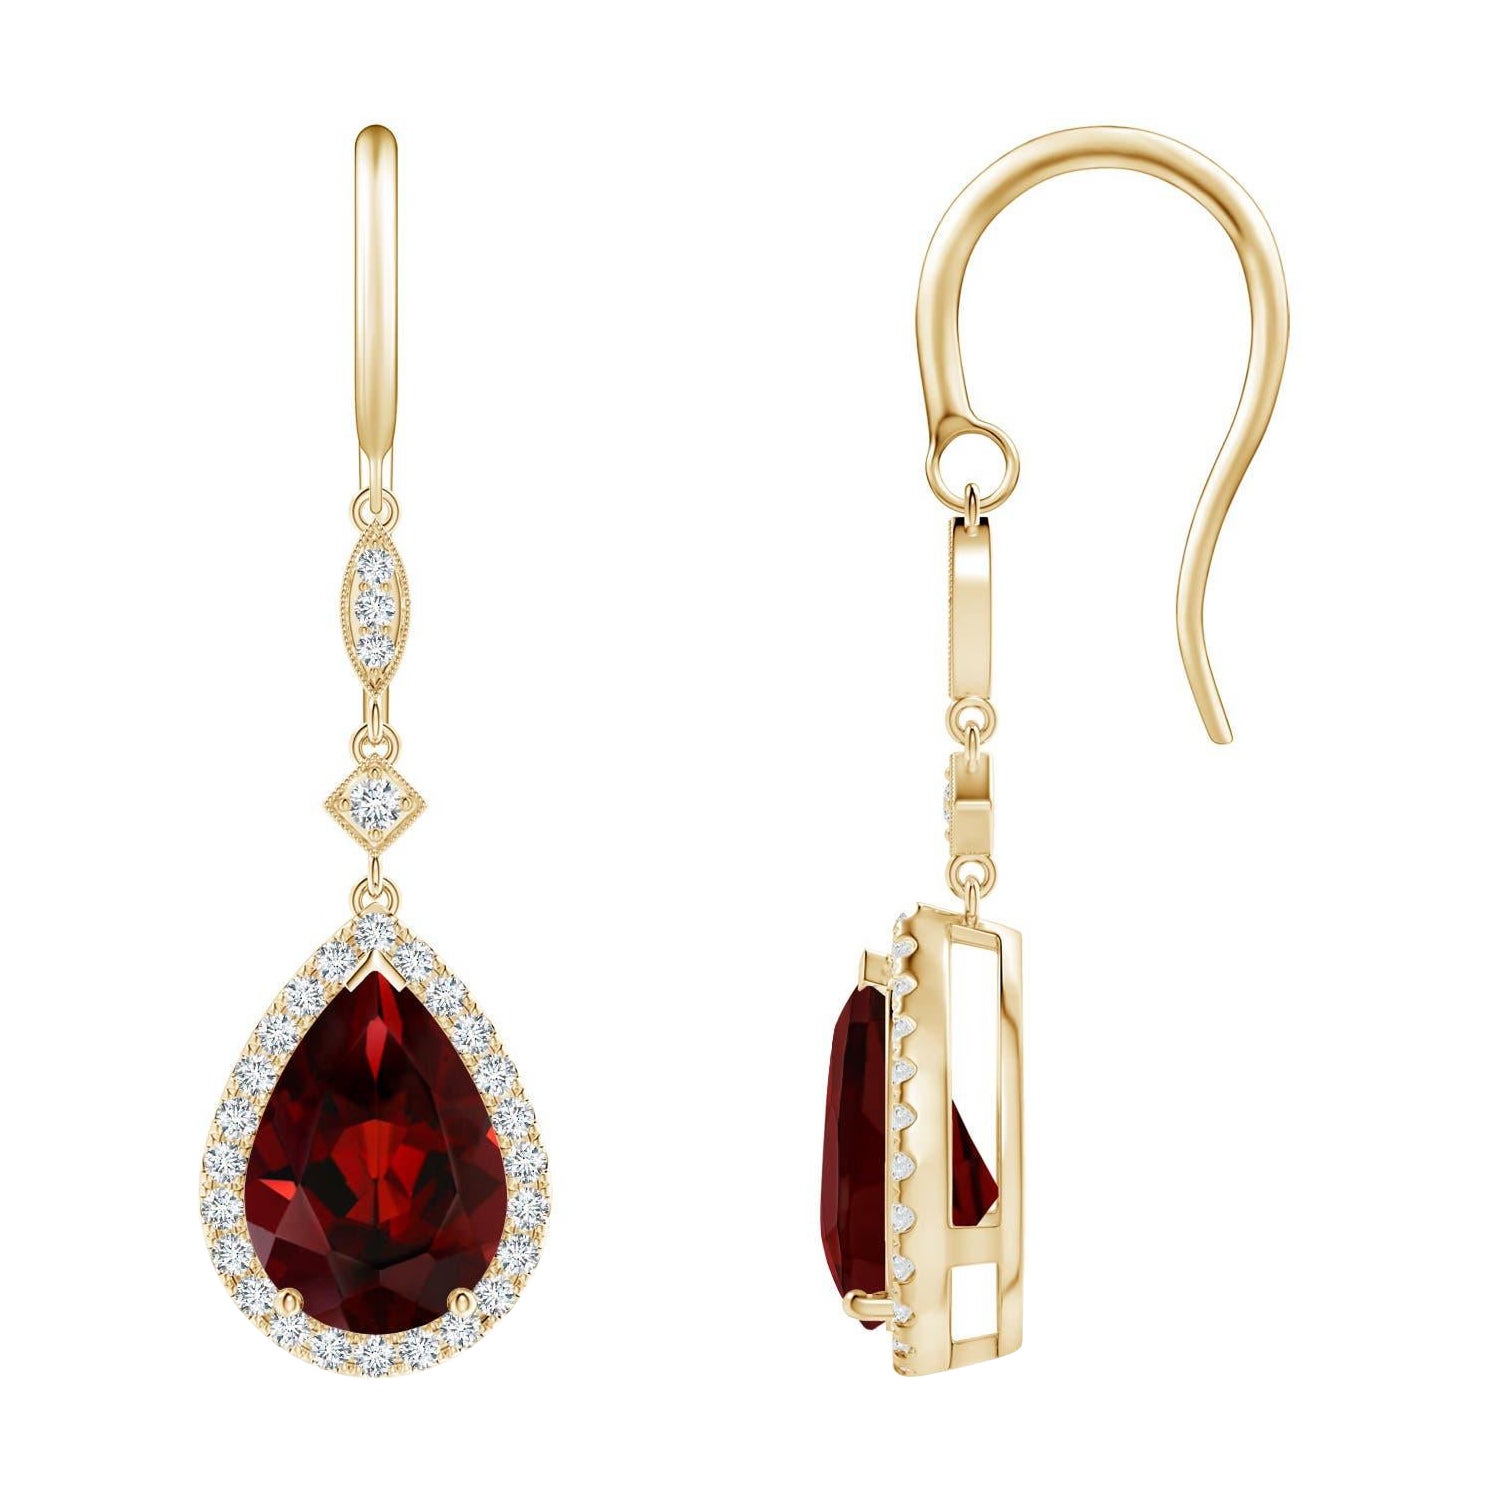 Natural Pear-Shaped 4.2ct Garnet Drop Earrings with Diamond in 14K Yellow Gold For Sale